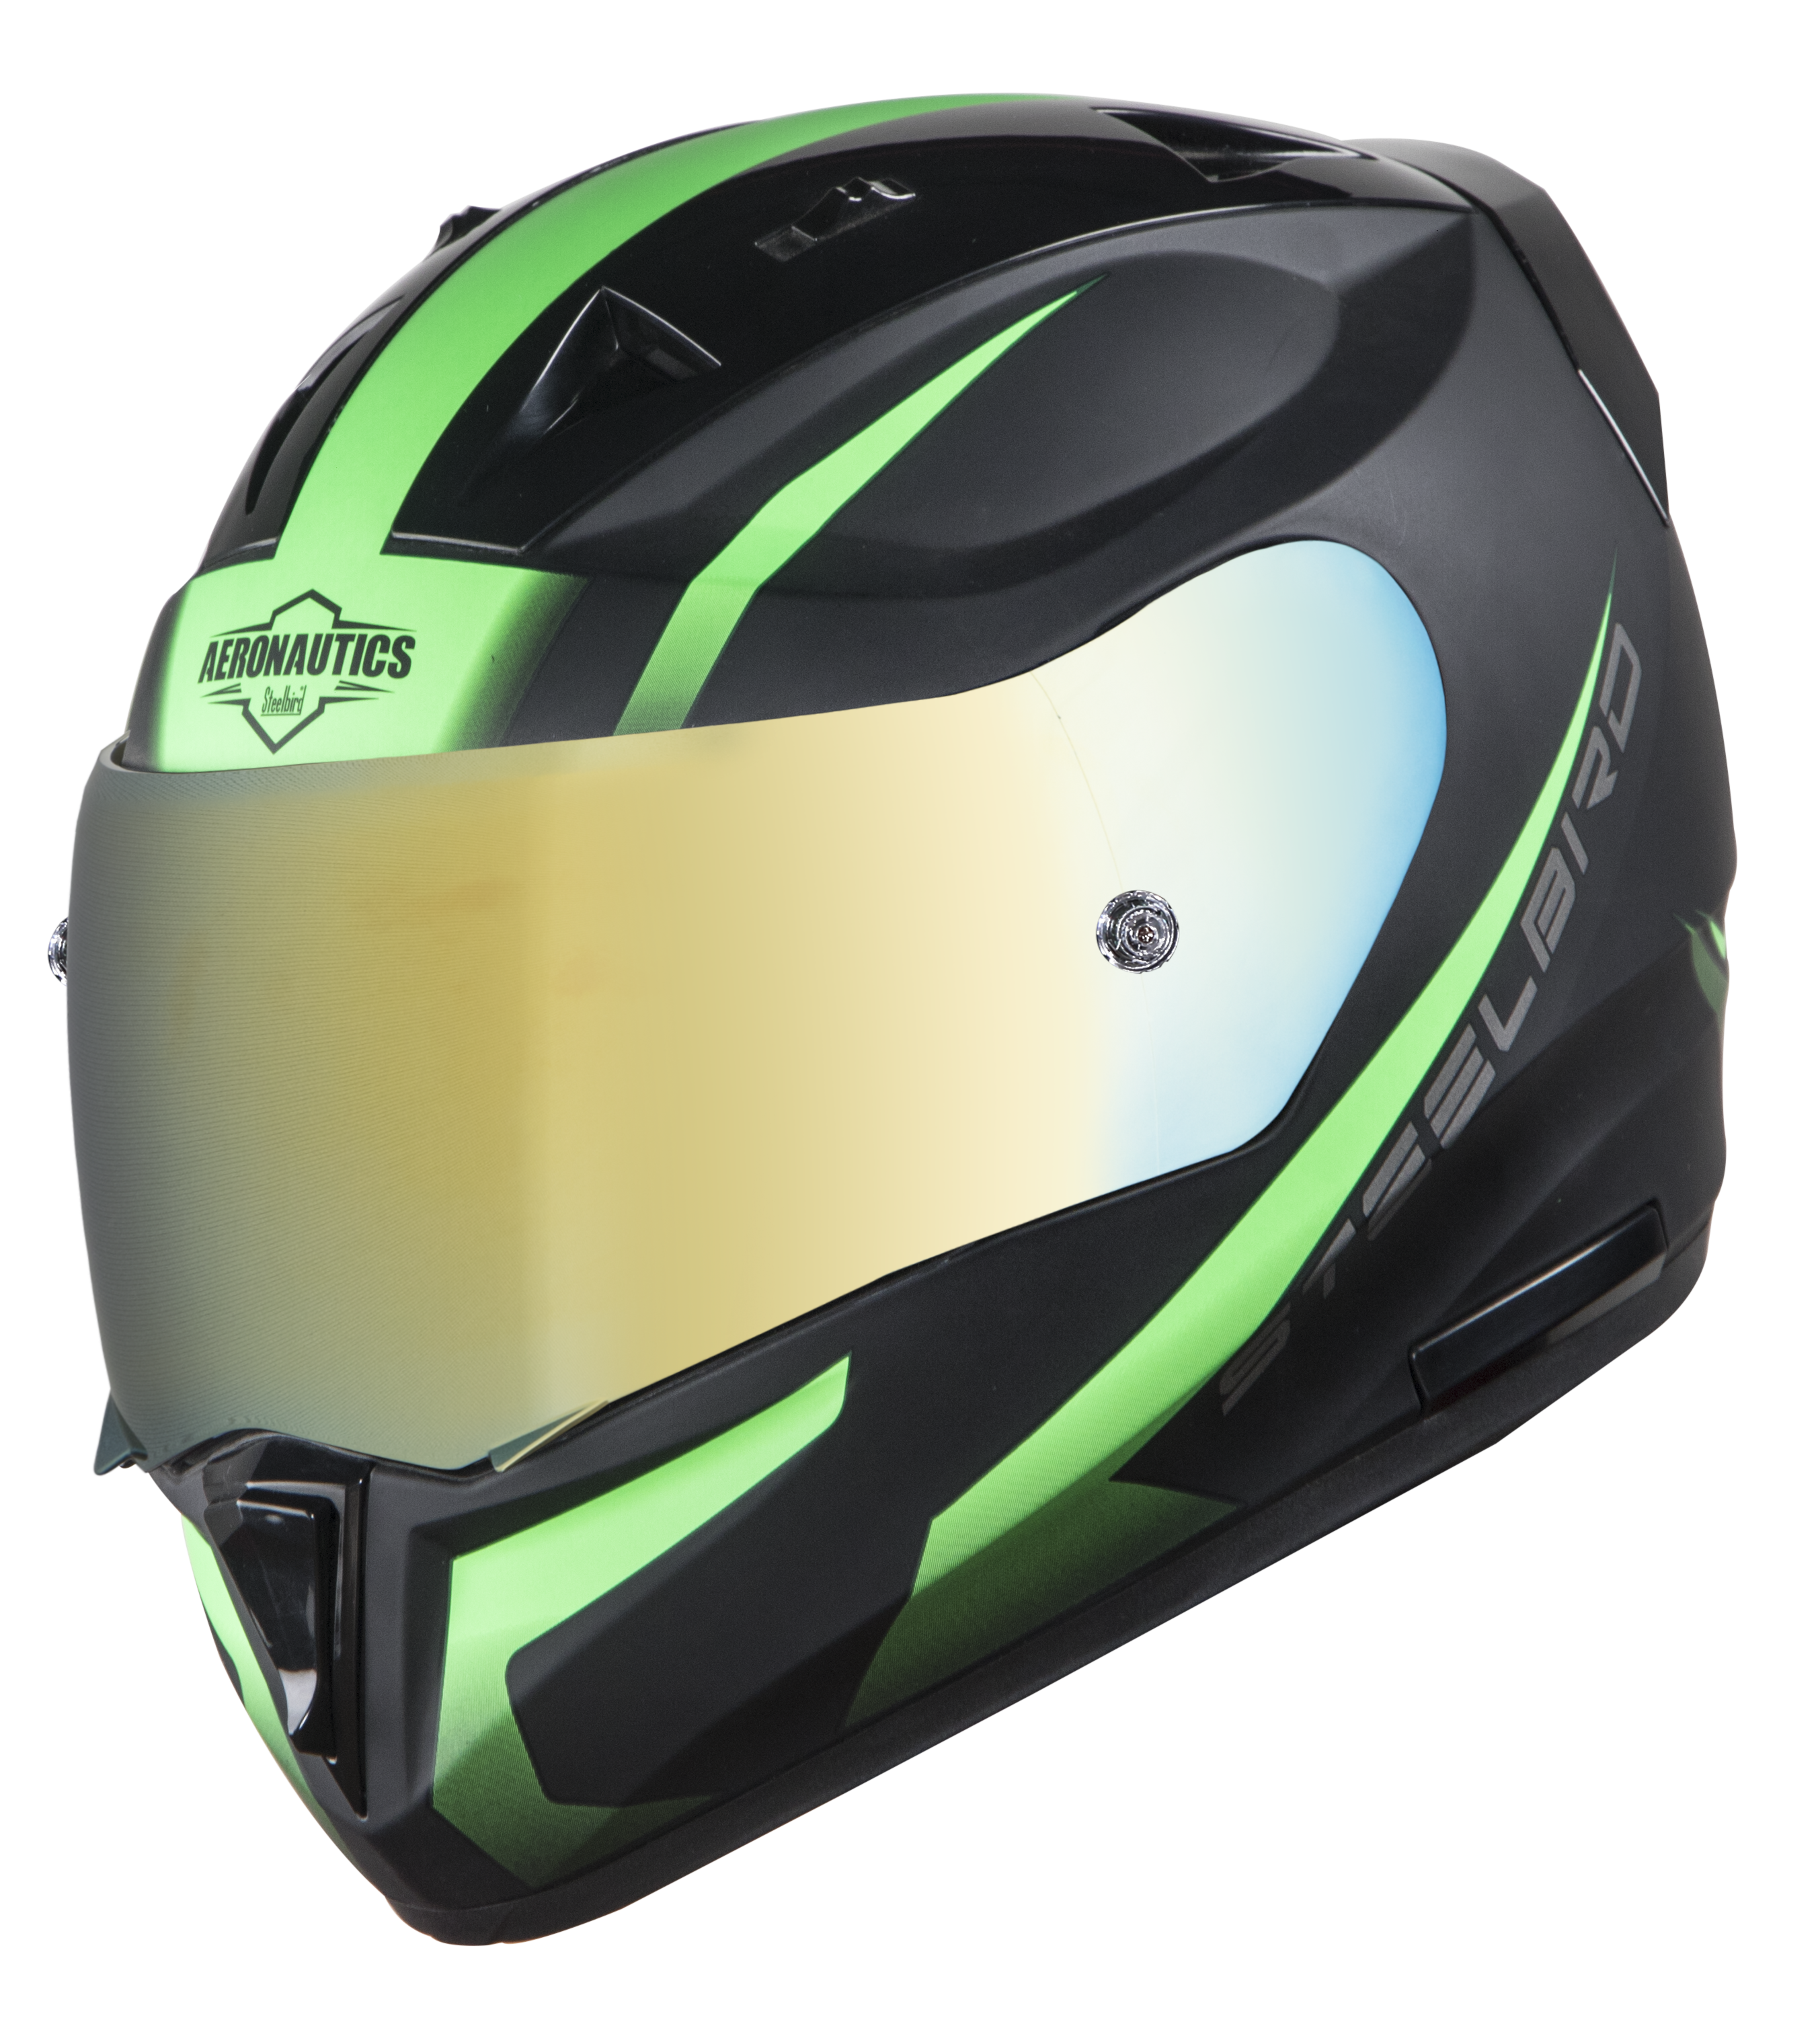 SA-1 WHIF Mat Black/Green (Fitted With Clear Visor Extra Anti-Fog Shield Chrome Gold Visor Free)